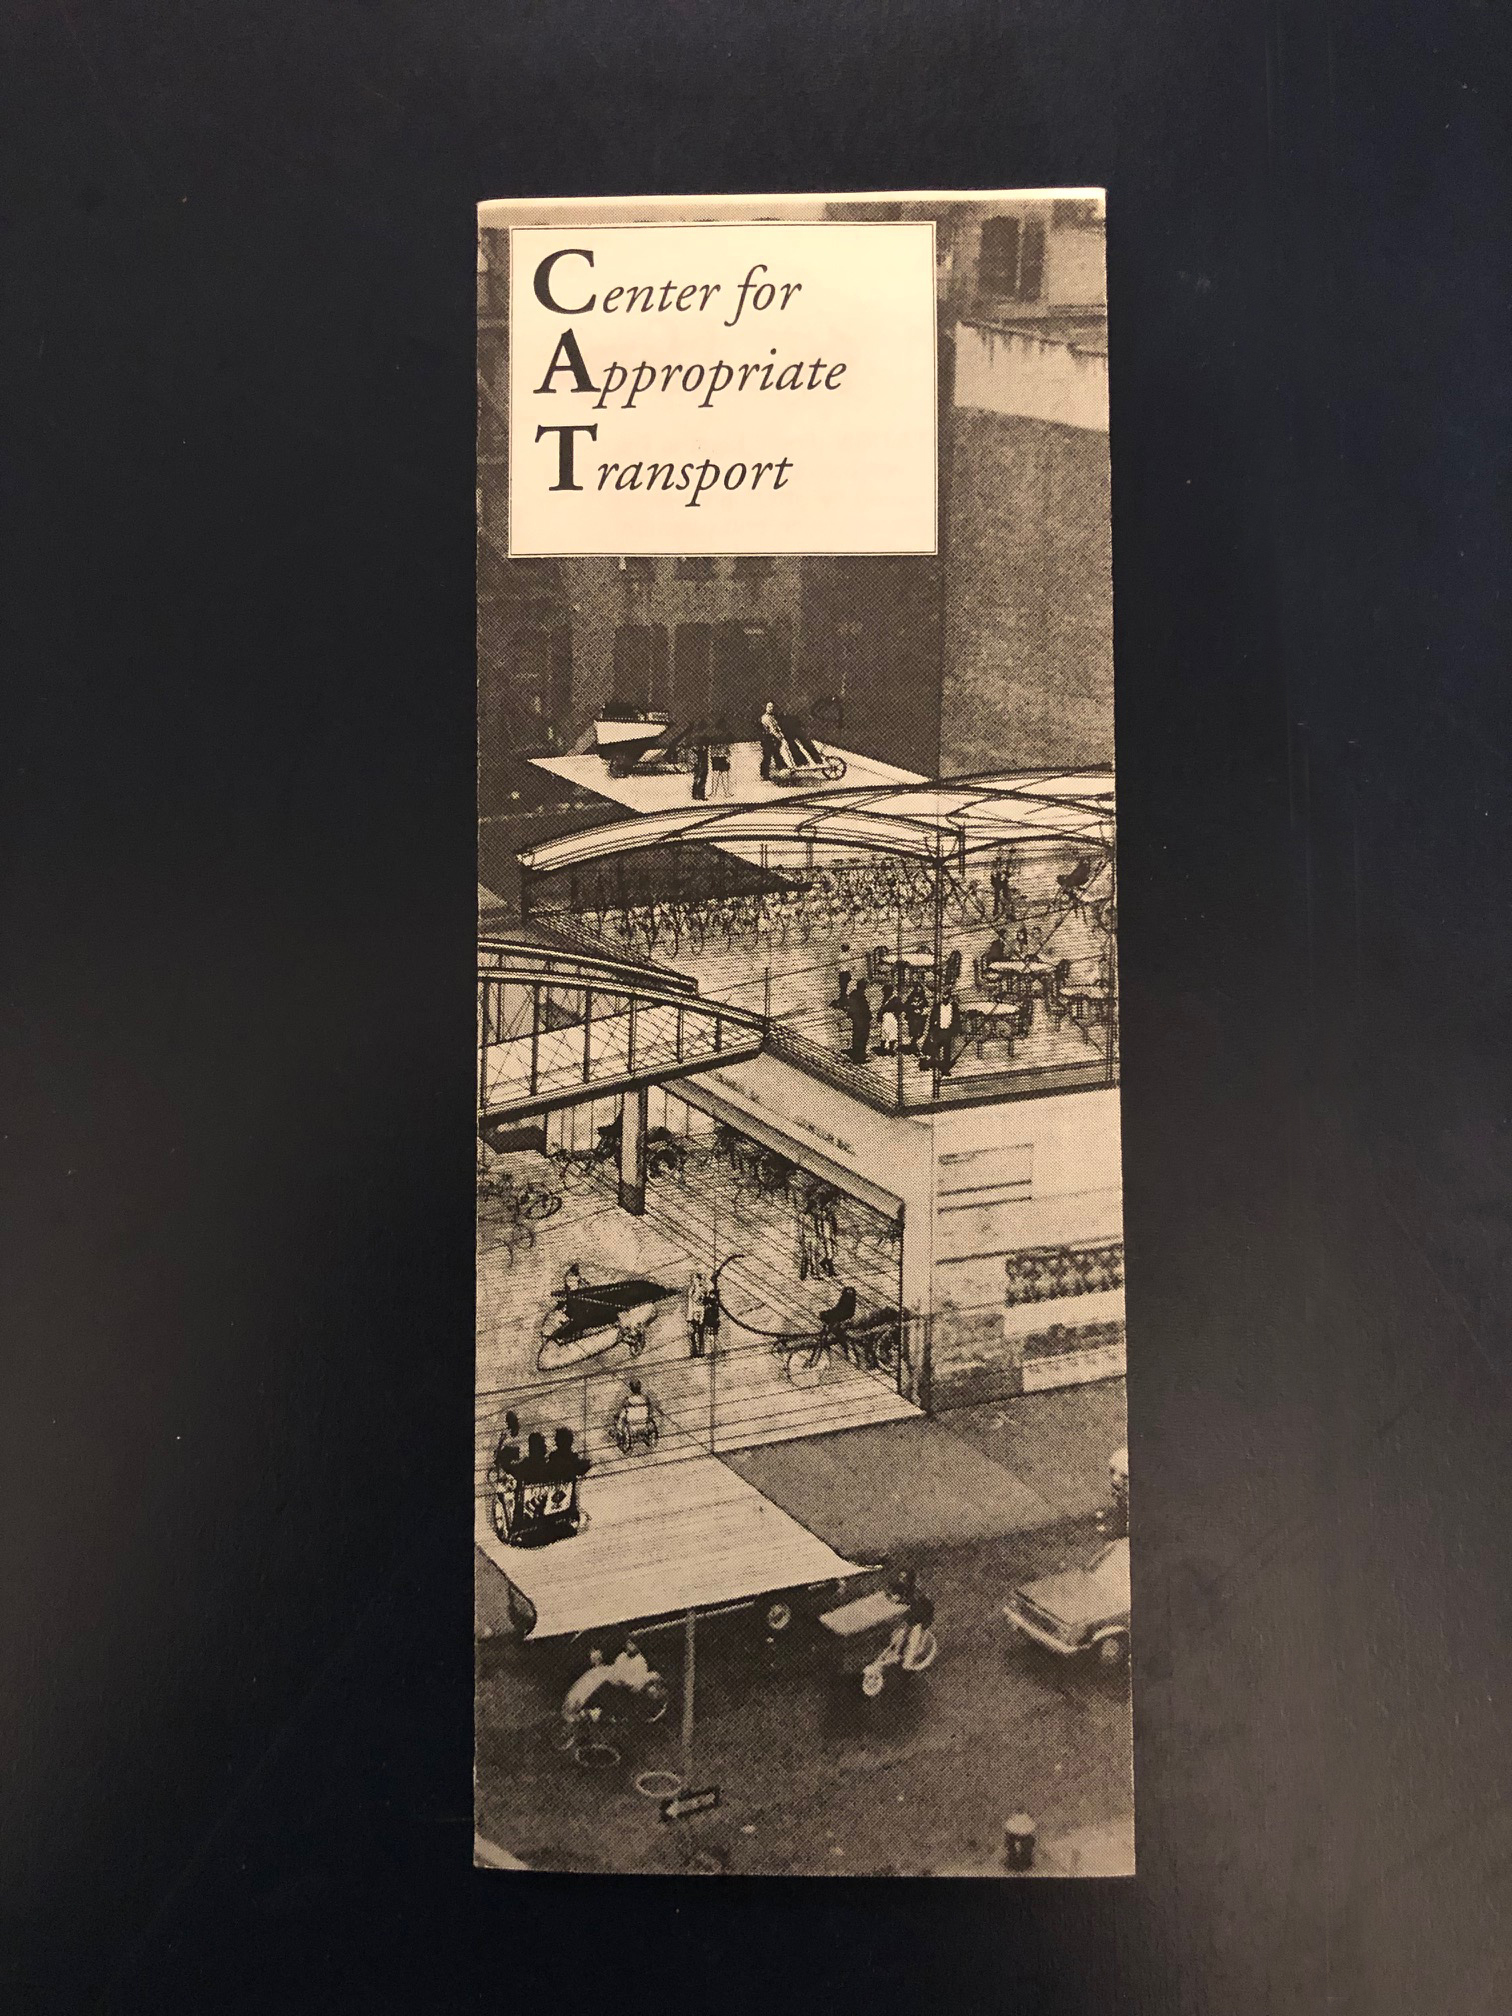 Cover of a pamphlet from the Center for Appropriate Transport that shows a illustration of a busy transportation terminal